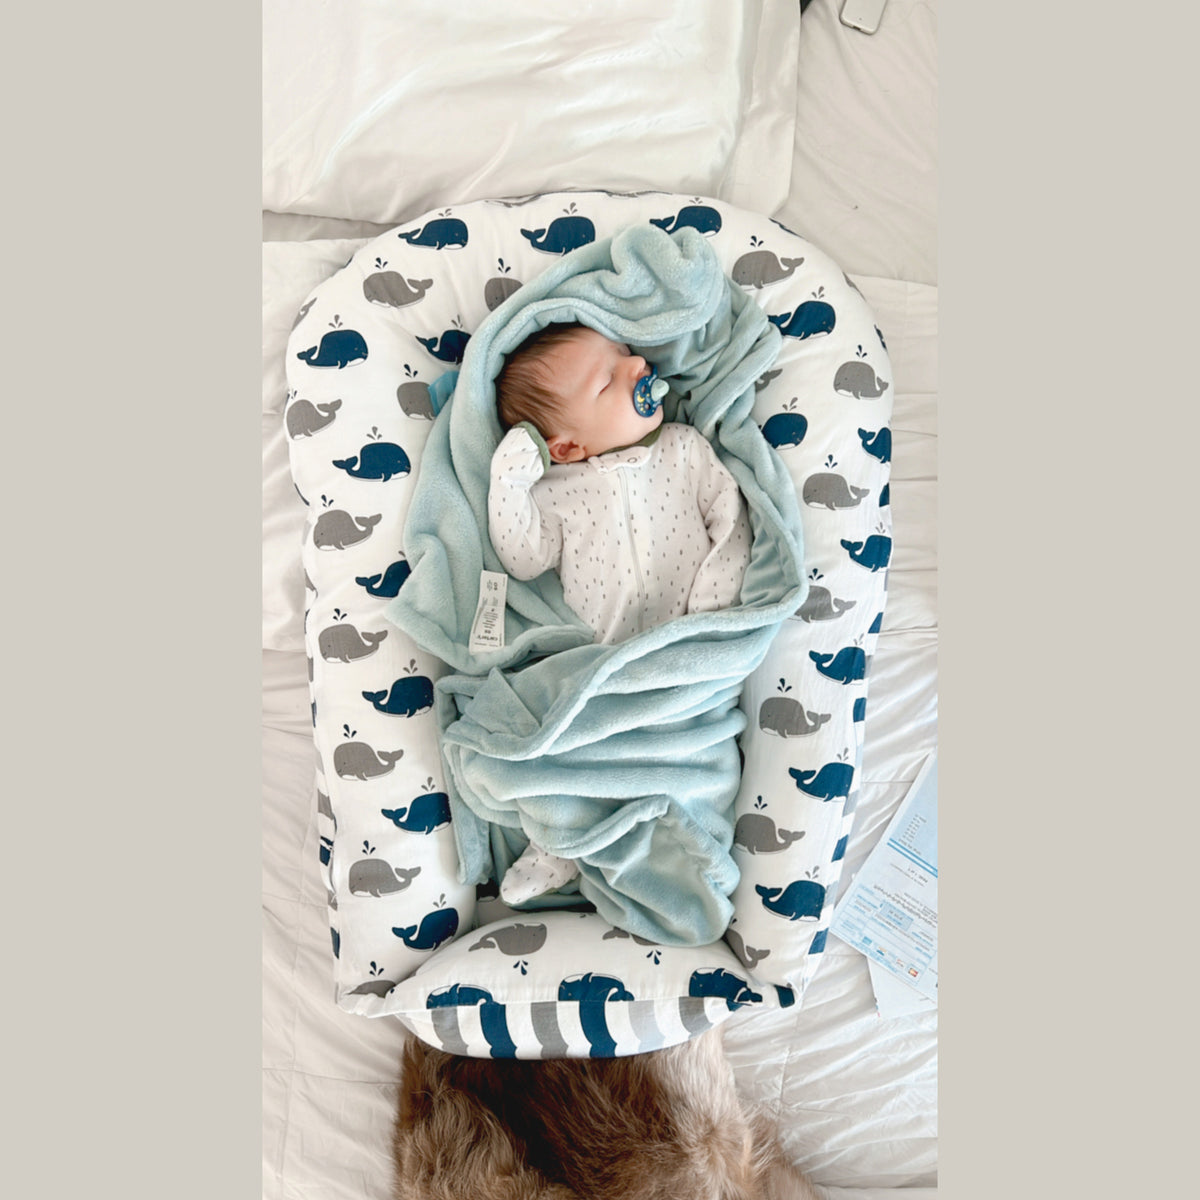 Baby Lounger for Newborns (Whales)